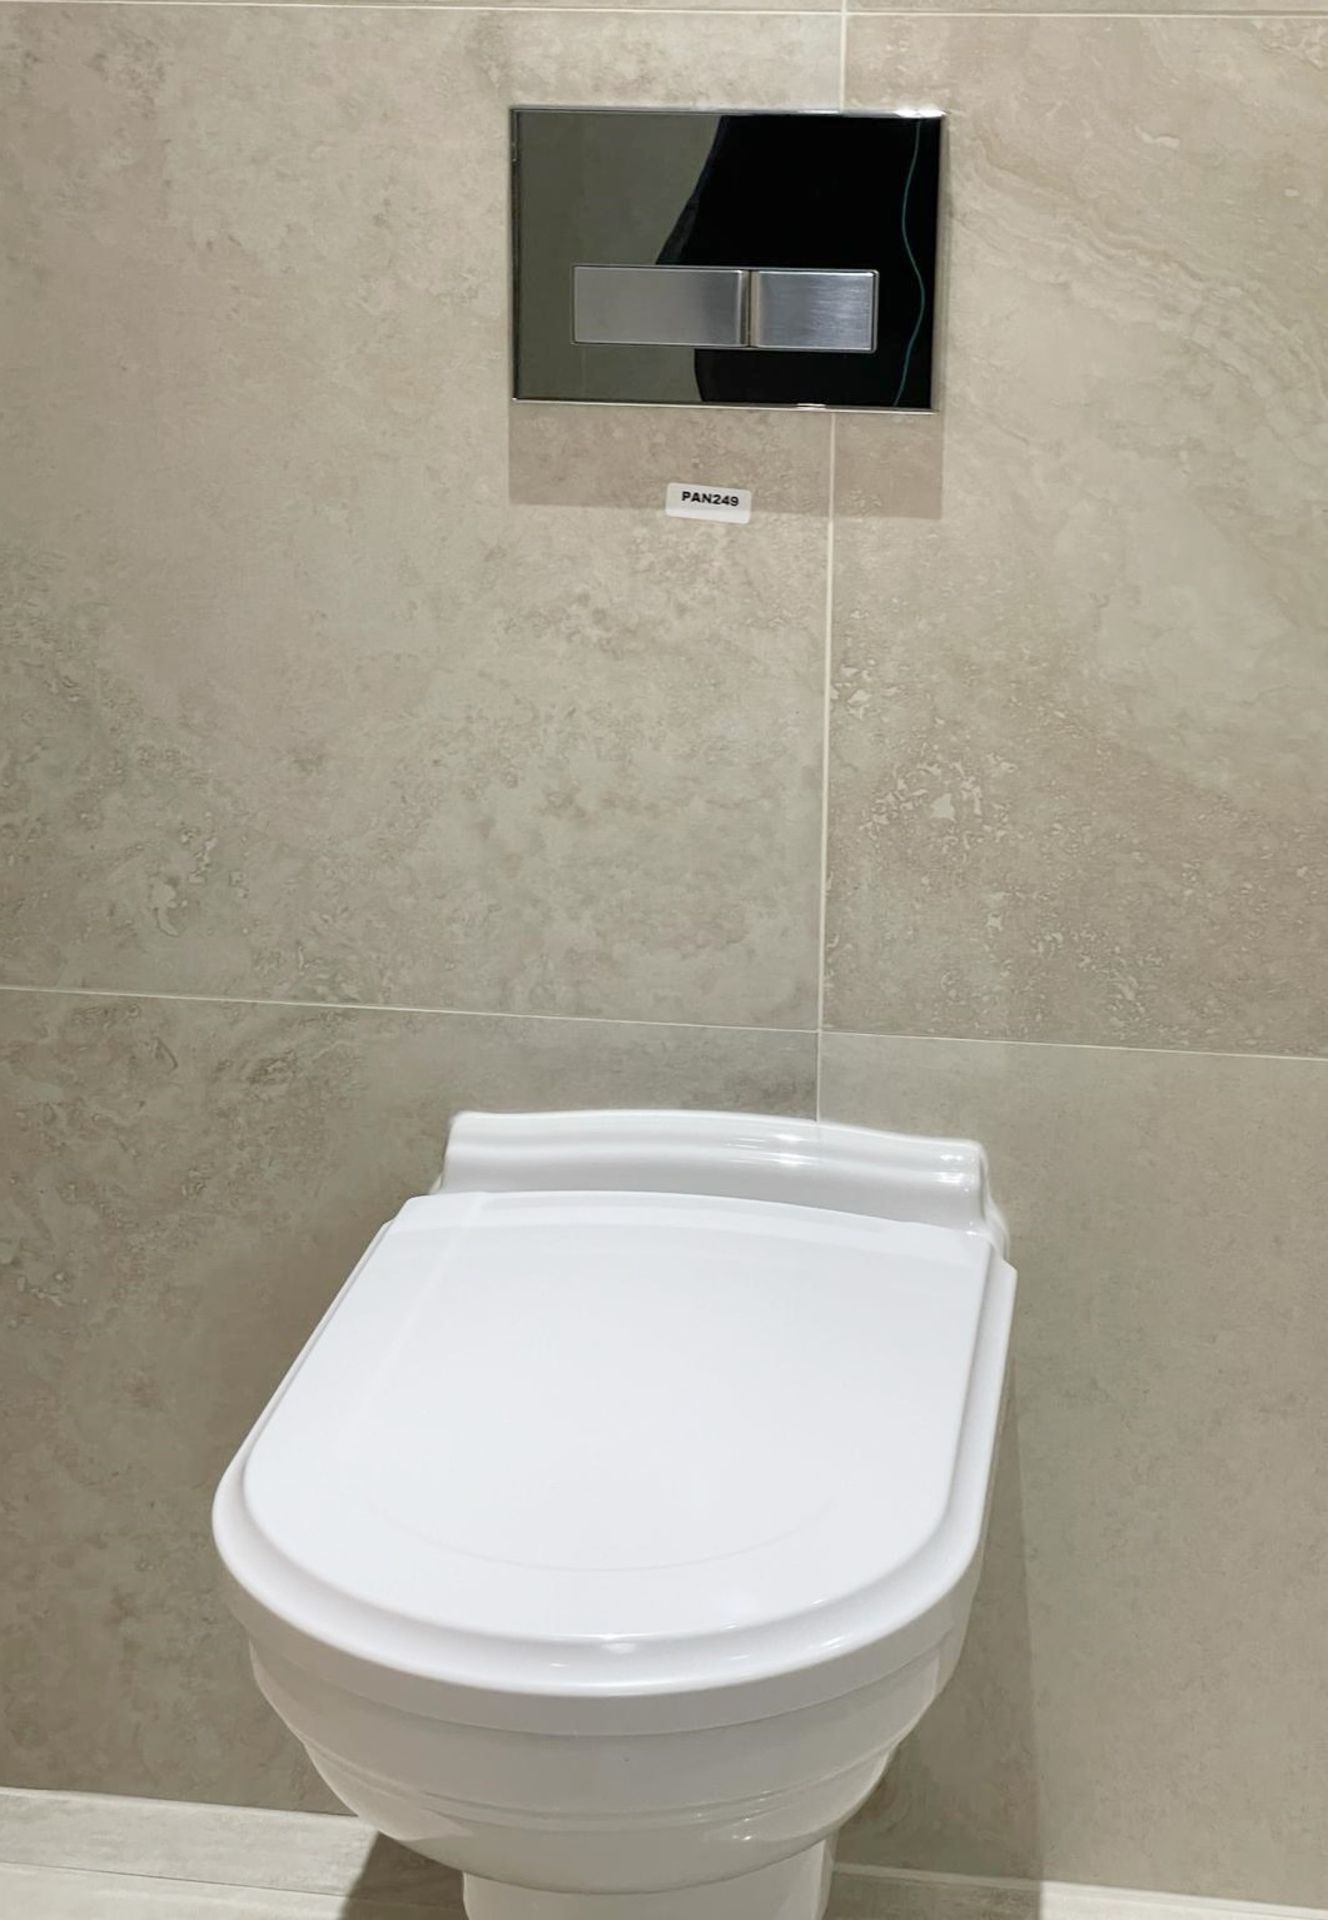 1 x VILLEROY & BOCH Wall Hung Toilet with Geberit Flush Plate - Ref: PAN249 - CL896 - NO VAT ON - Image 10 of 10